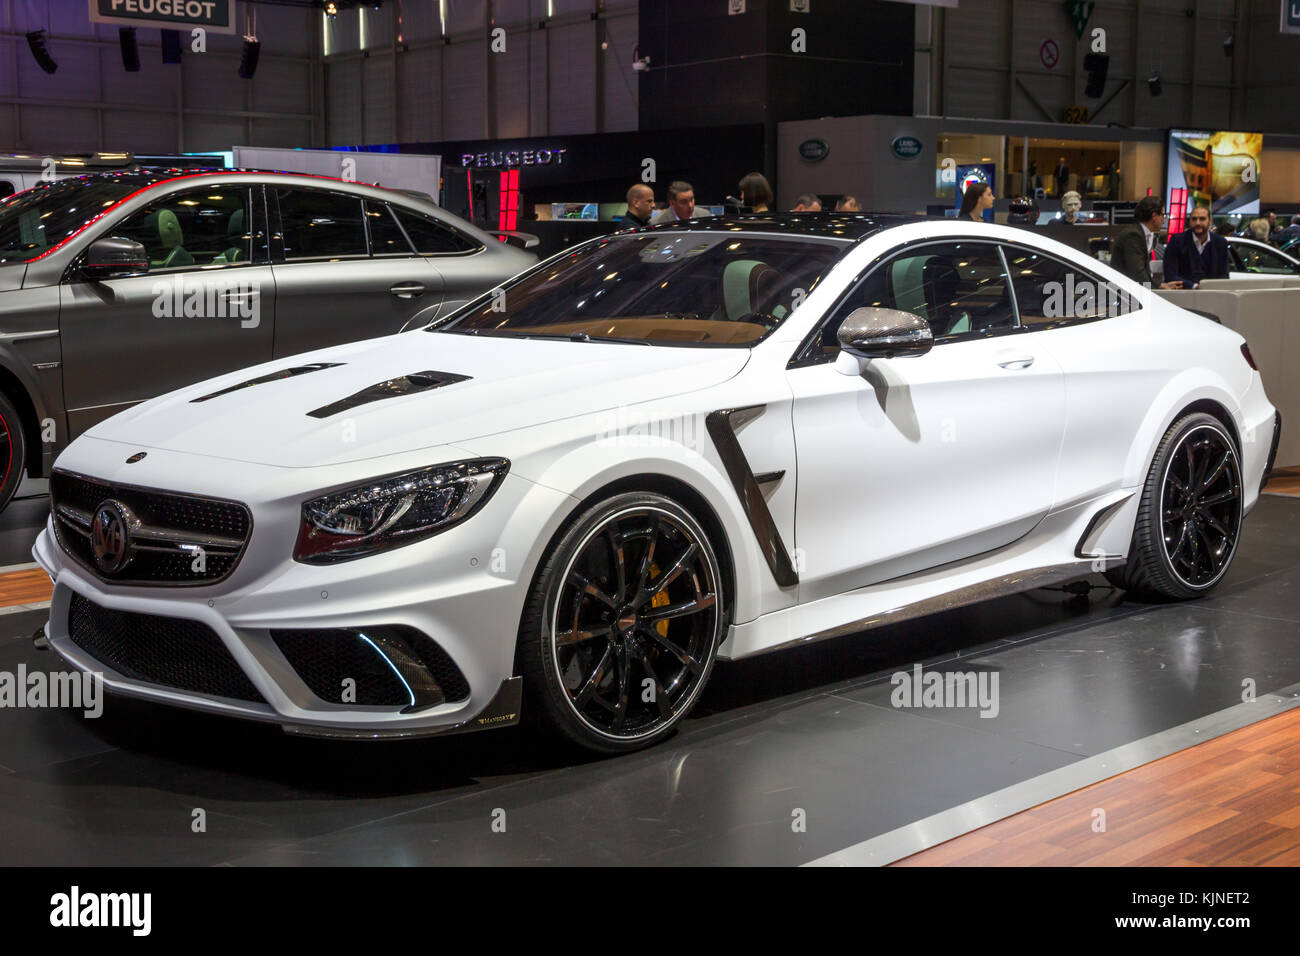 S63 Amg Stock Photos S63 Amg Stock Images Alamy